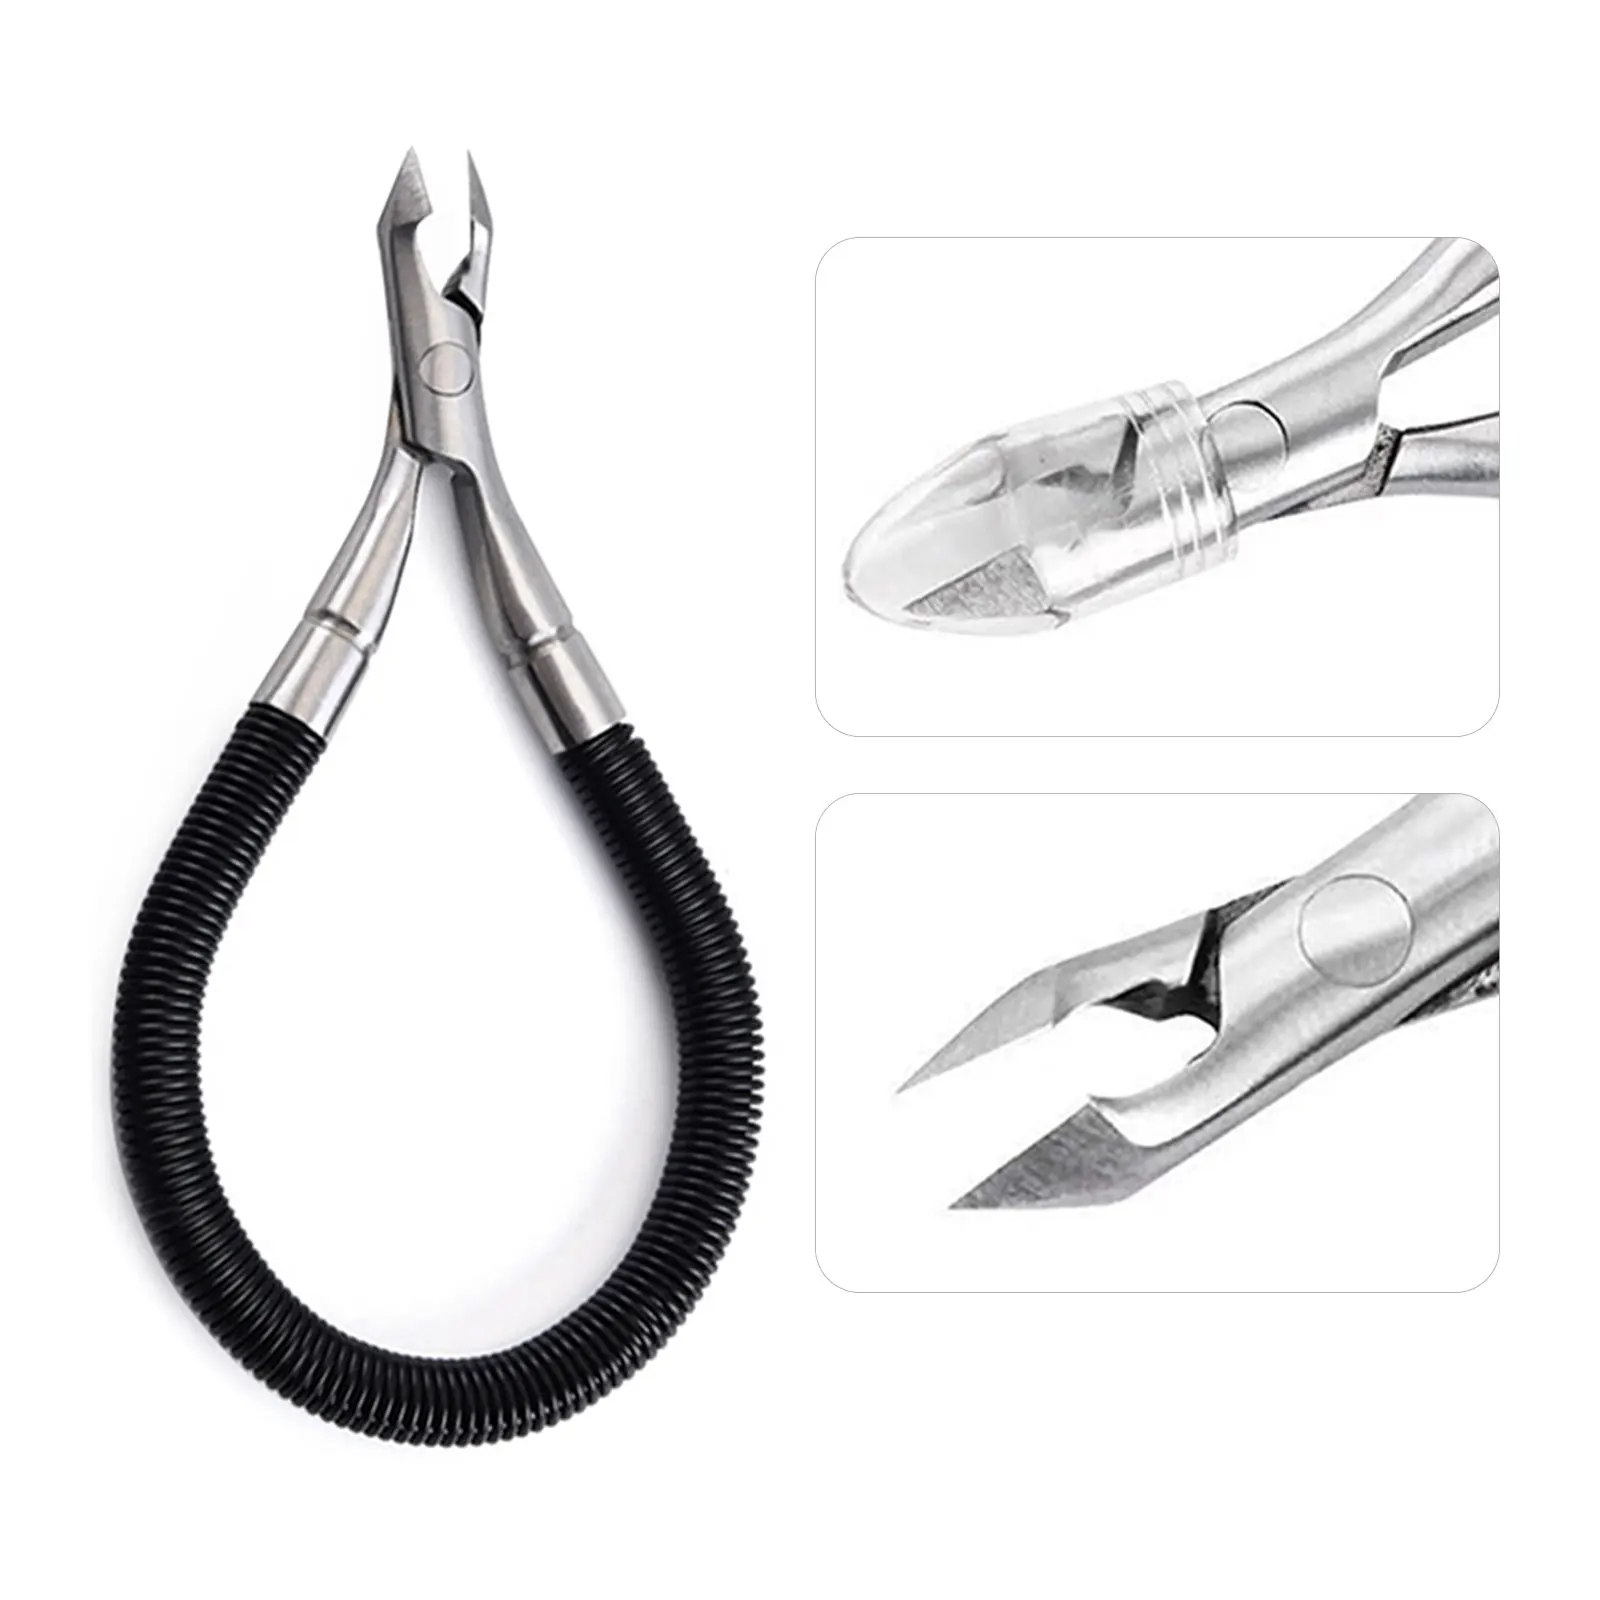 

Grip & Snip Spiral Spring Cuticle Trimmer Nippers Cleaner Nail Gap Remover Dead Skin Rescue Hangnail Paronychia Manicure Tools